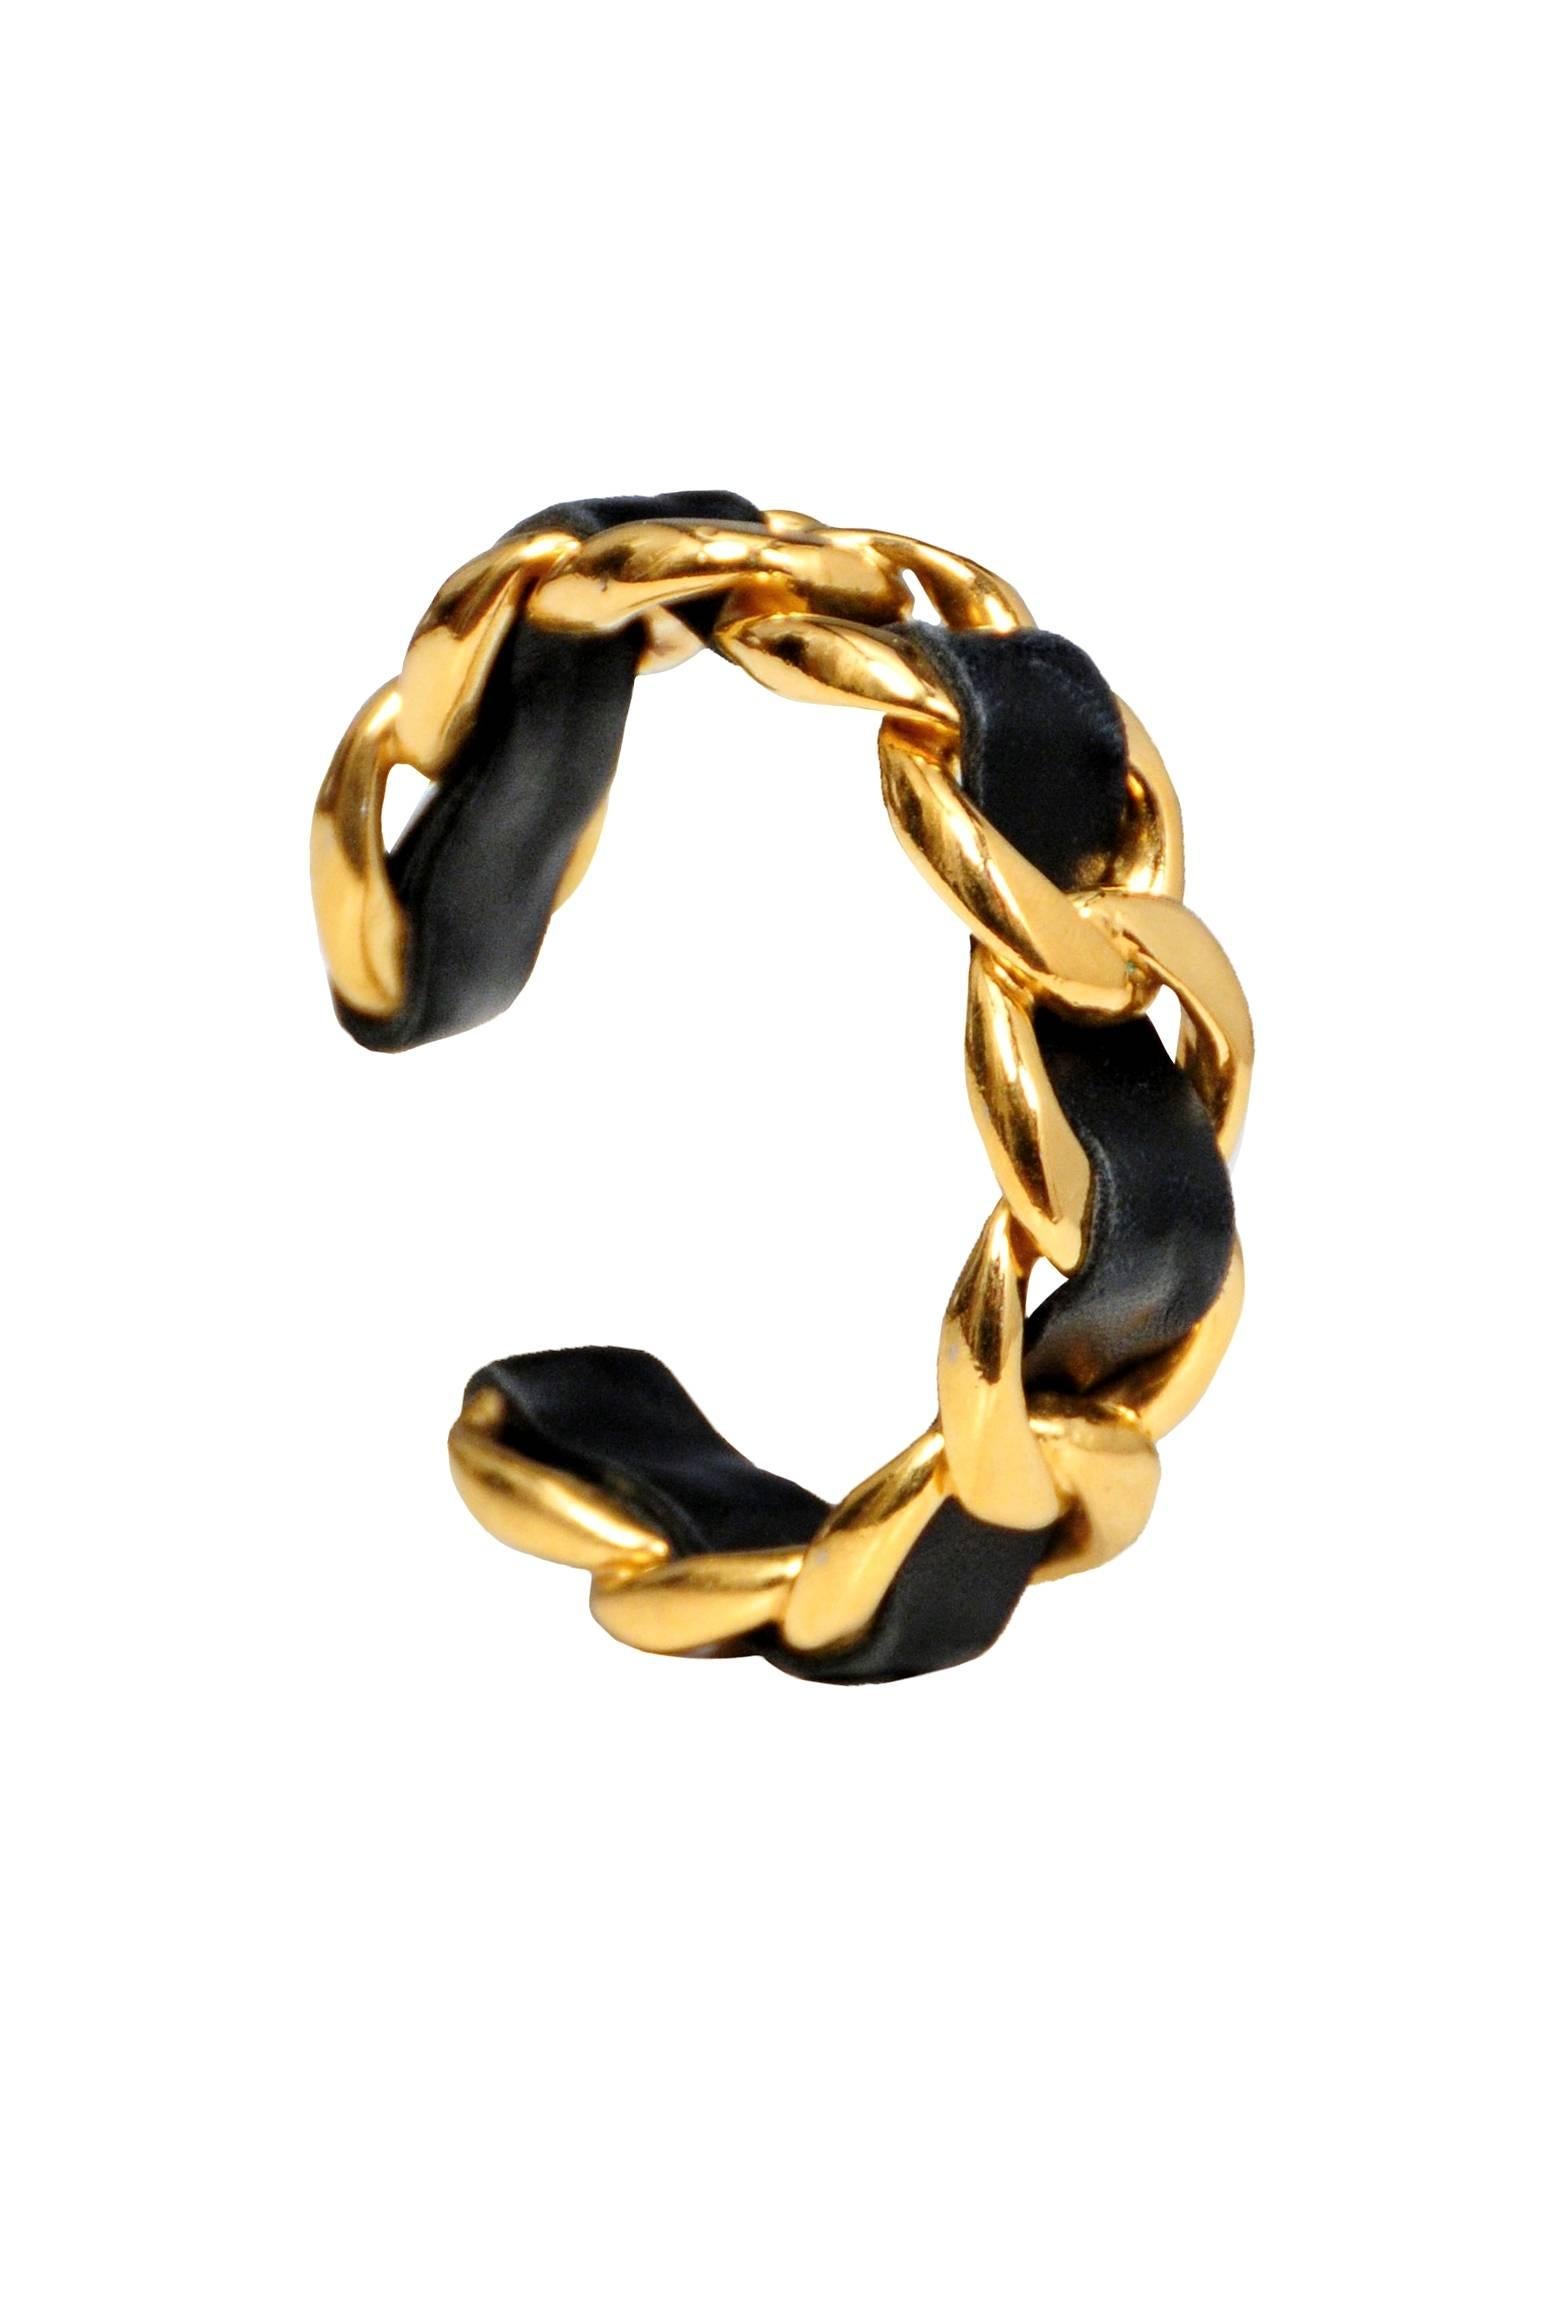 Vintage Chanel gold tone chain bracelet featuring black leather braided through, resembling the iconic braided chain straps on Chanel handbags.